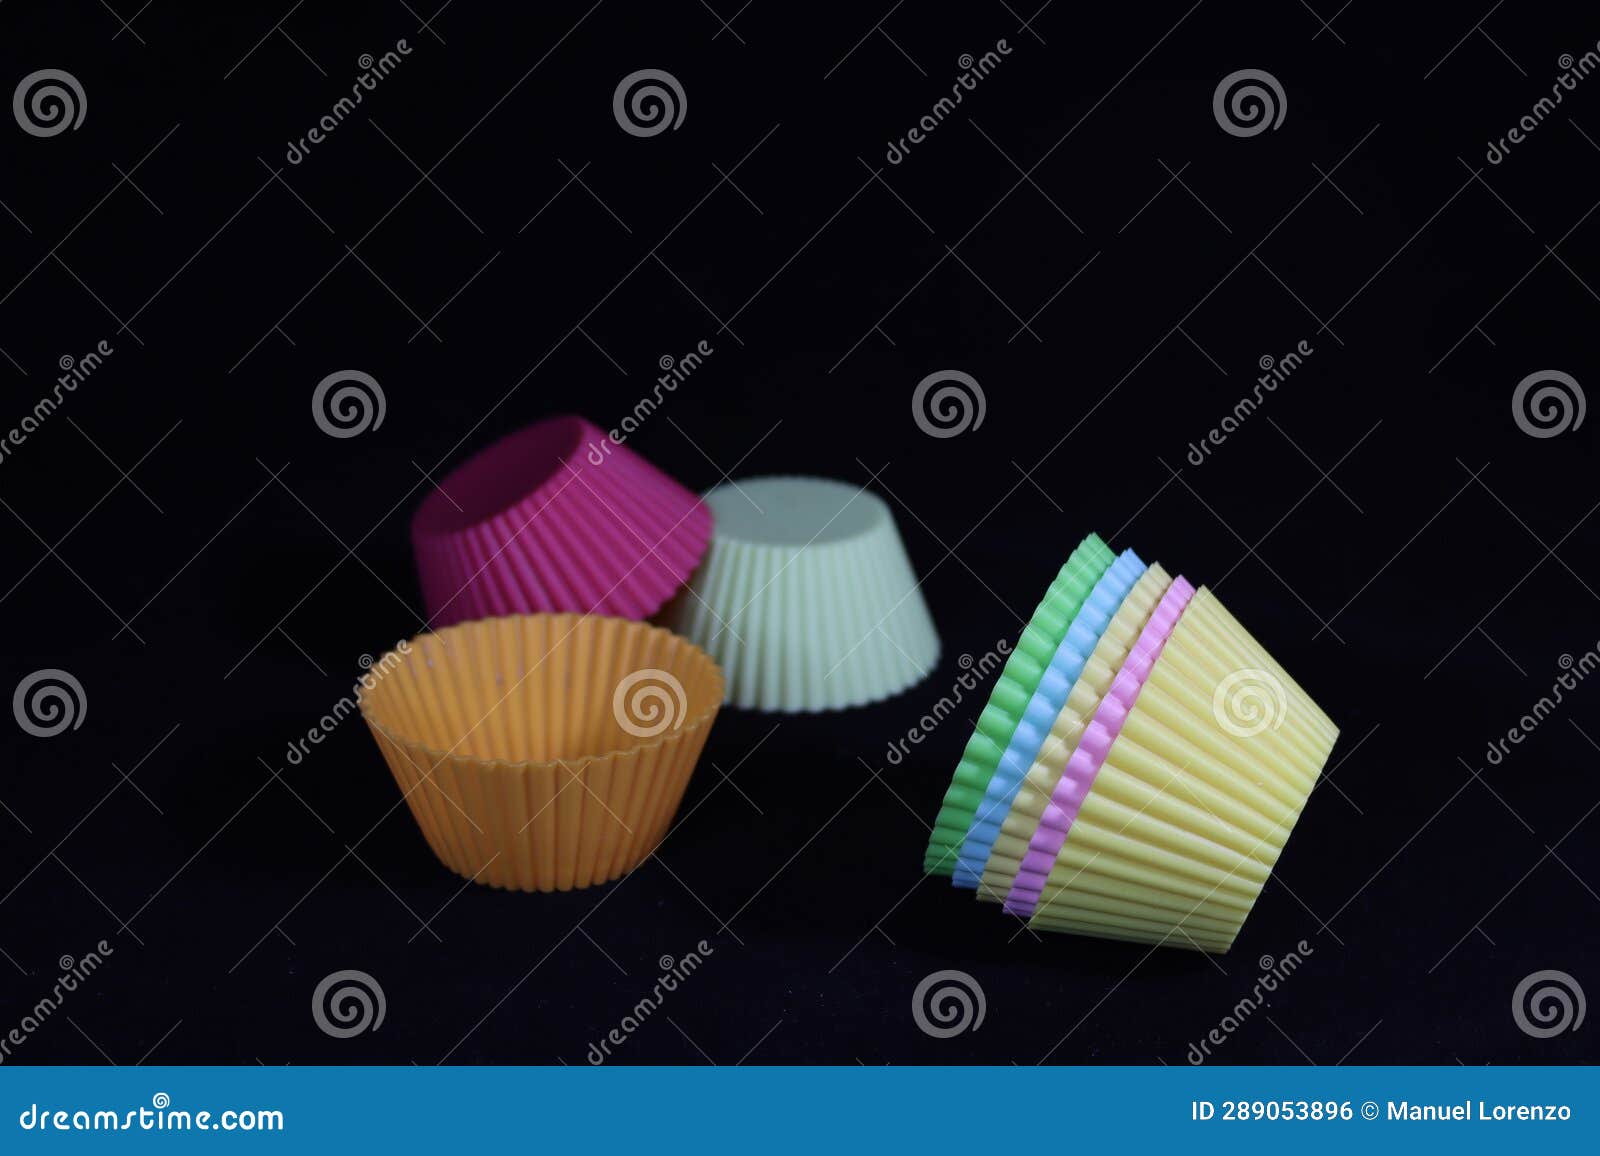 beautiful molds for dessert silicone muffins colors s